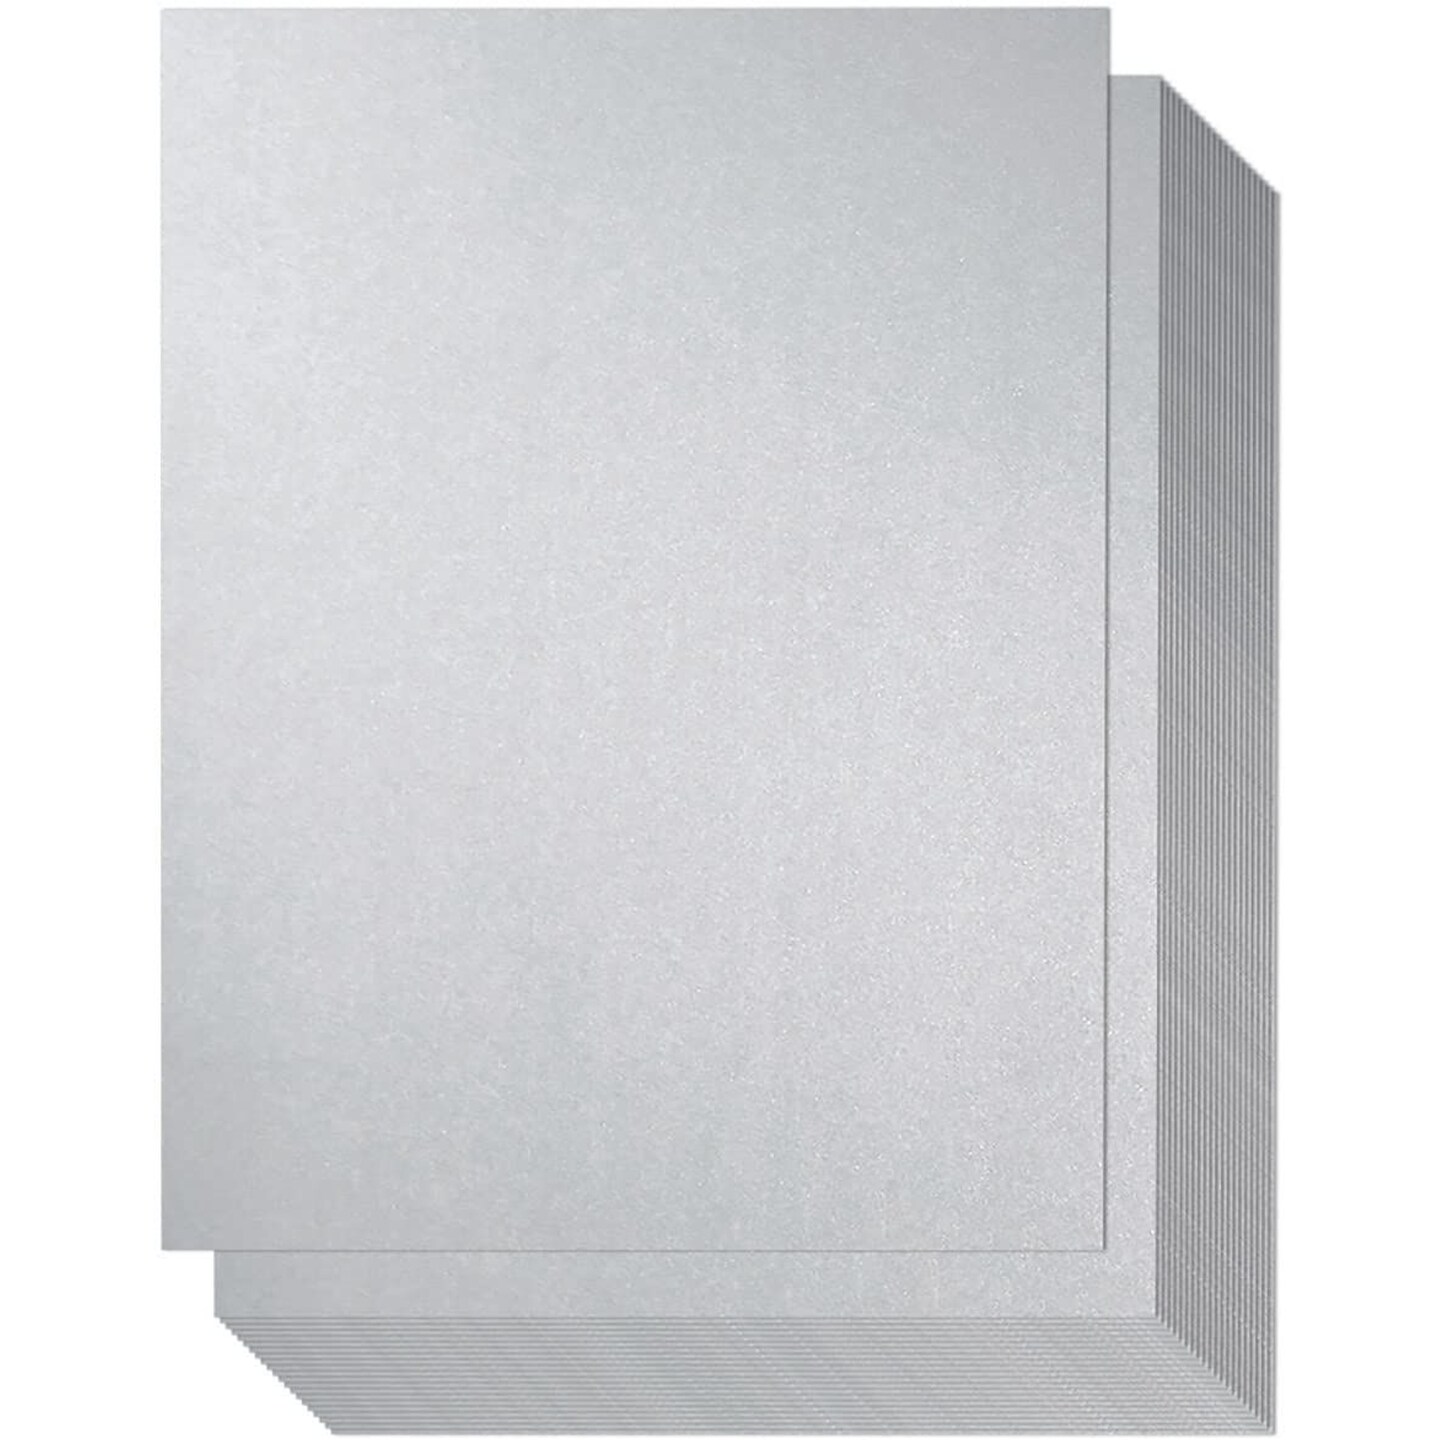 96 Sheet Silver Shimmer Metallic Cardstock, Double-Sided Paper for Scrapbooking, DIY Projects (8.5x11 In, 250 gsm)